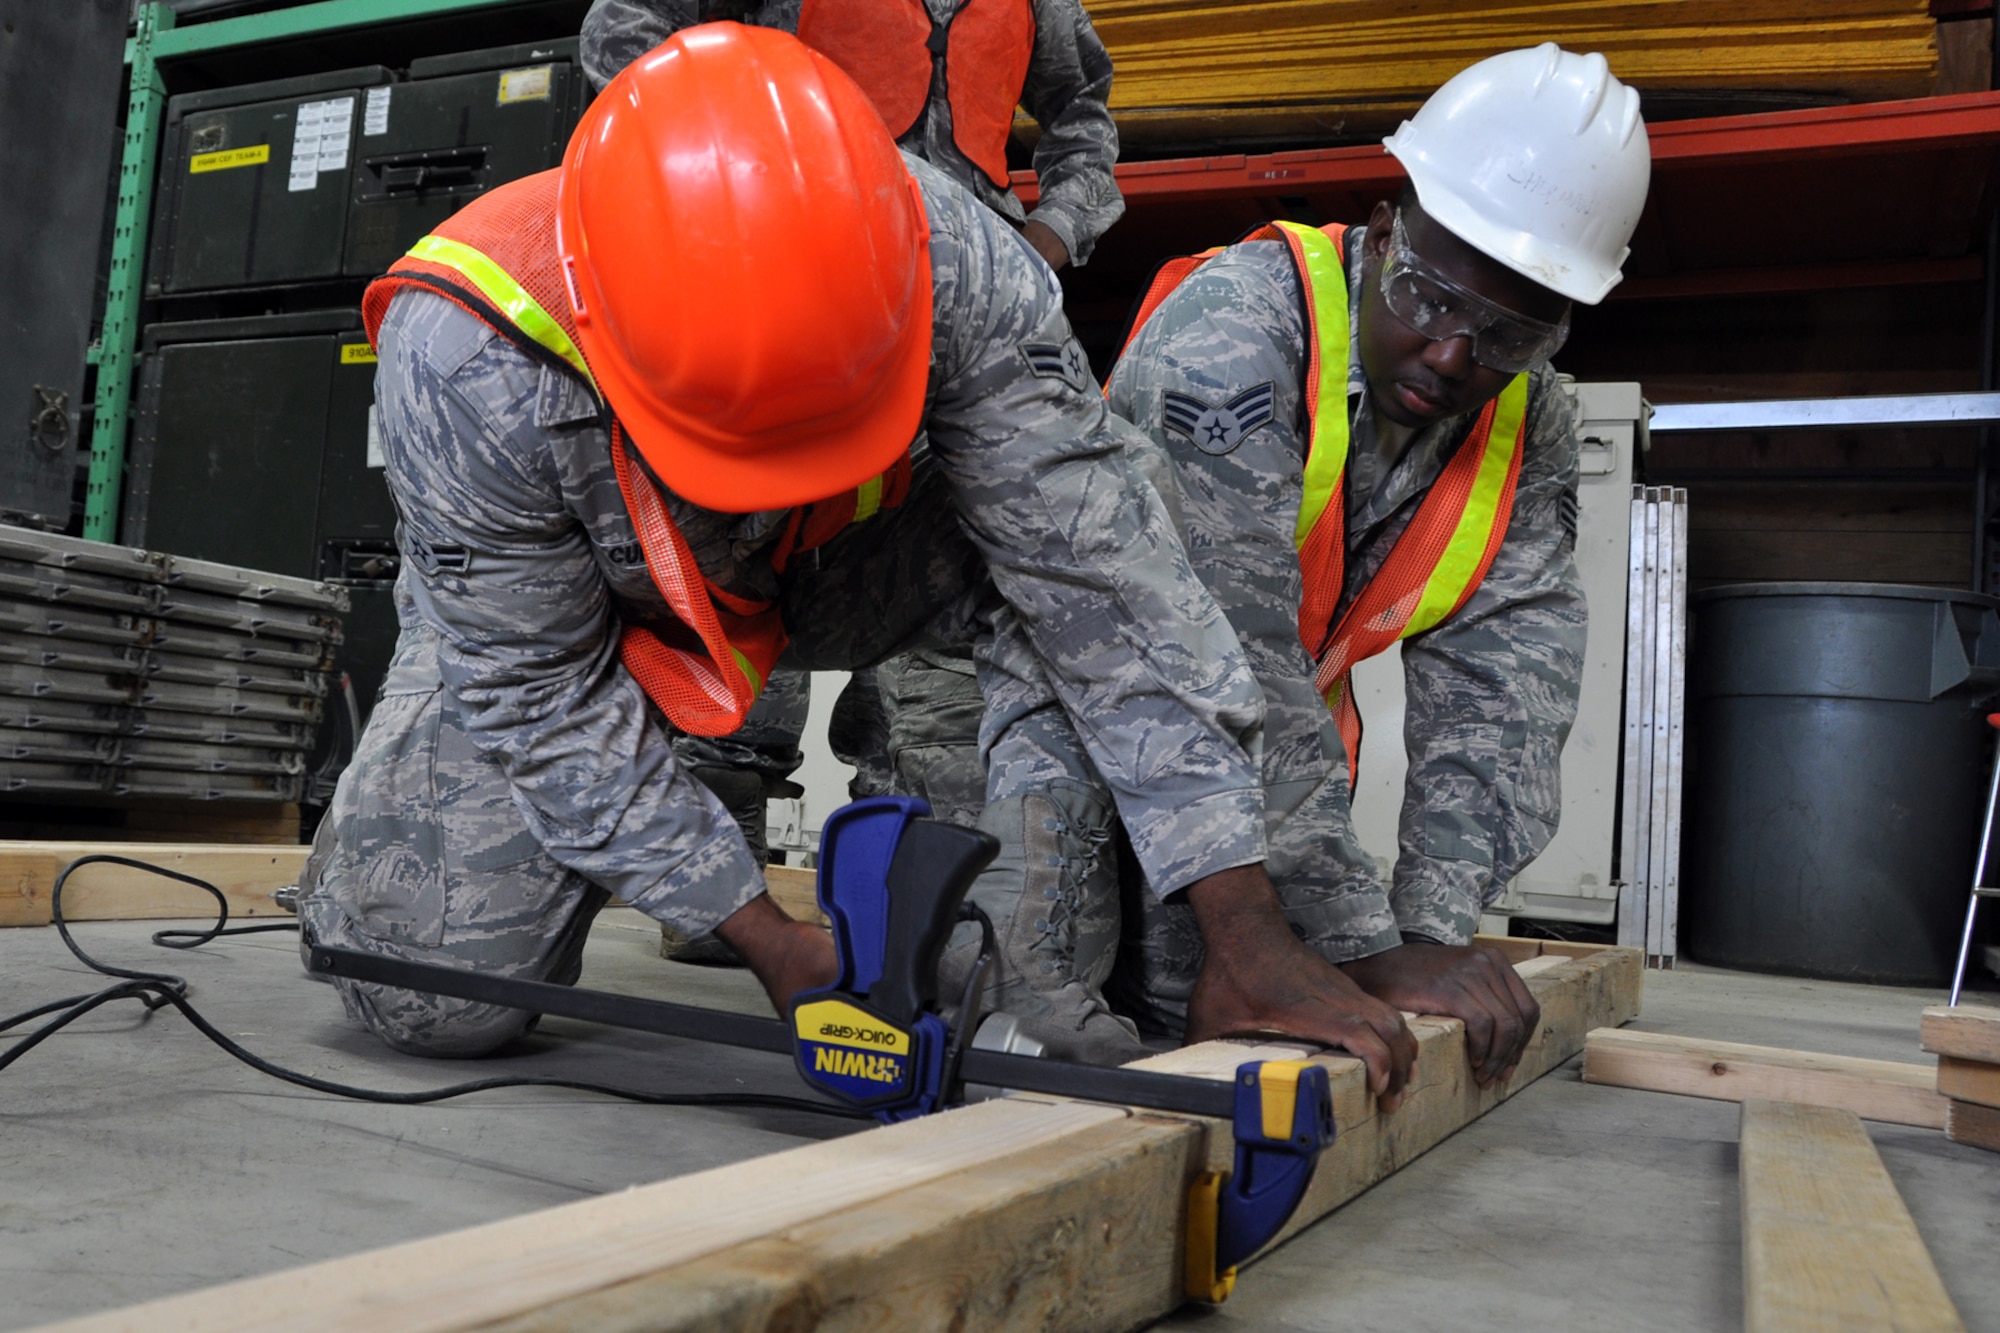 Senior Airman Thorton Allen holds a wood frame as Airman 1st Class Brandon Curry secures it with a screw at Youngstown Air Reserve Station, Vienna, Ohio, Aug. 14, 2012. The frame will be used in the construction of defensive fighting positions (DFP) at a Prime Base Engineer Emergency Force (Prime BEEF) training area. Allen is a heating, ventilation, air conditioning and refrigeration technician, and Curry is an electrician. Both Airmen are assigned to the 307th Civil Engineer Squadron from Barksdale Air Force Base, La. They were part of a 29-person detail from Barksdale that spent two weeks at Youngstown assisting the 910 Civil Engineer Squadron build a training area. (U.S. Air Force photo by Master Sgt. Jeff Walston) 